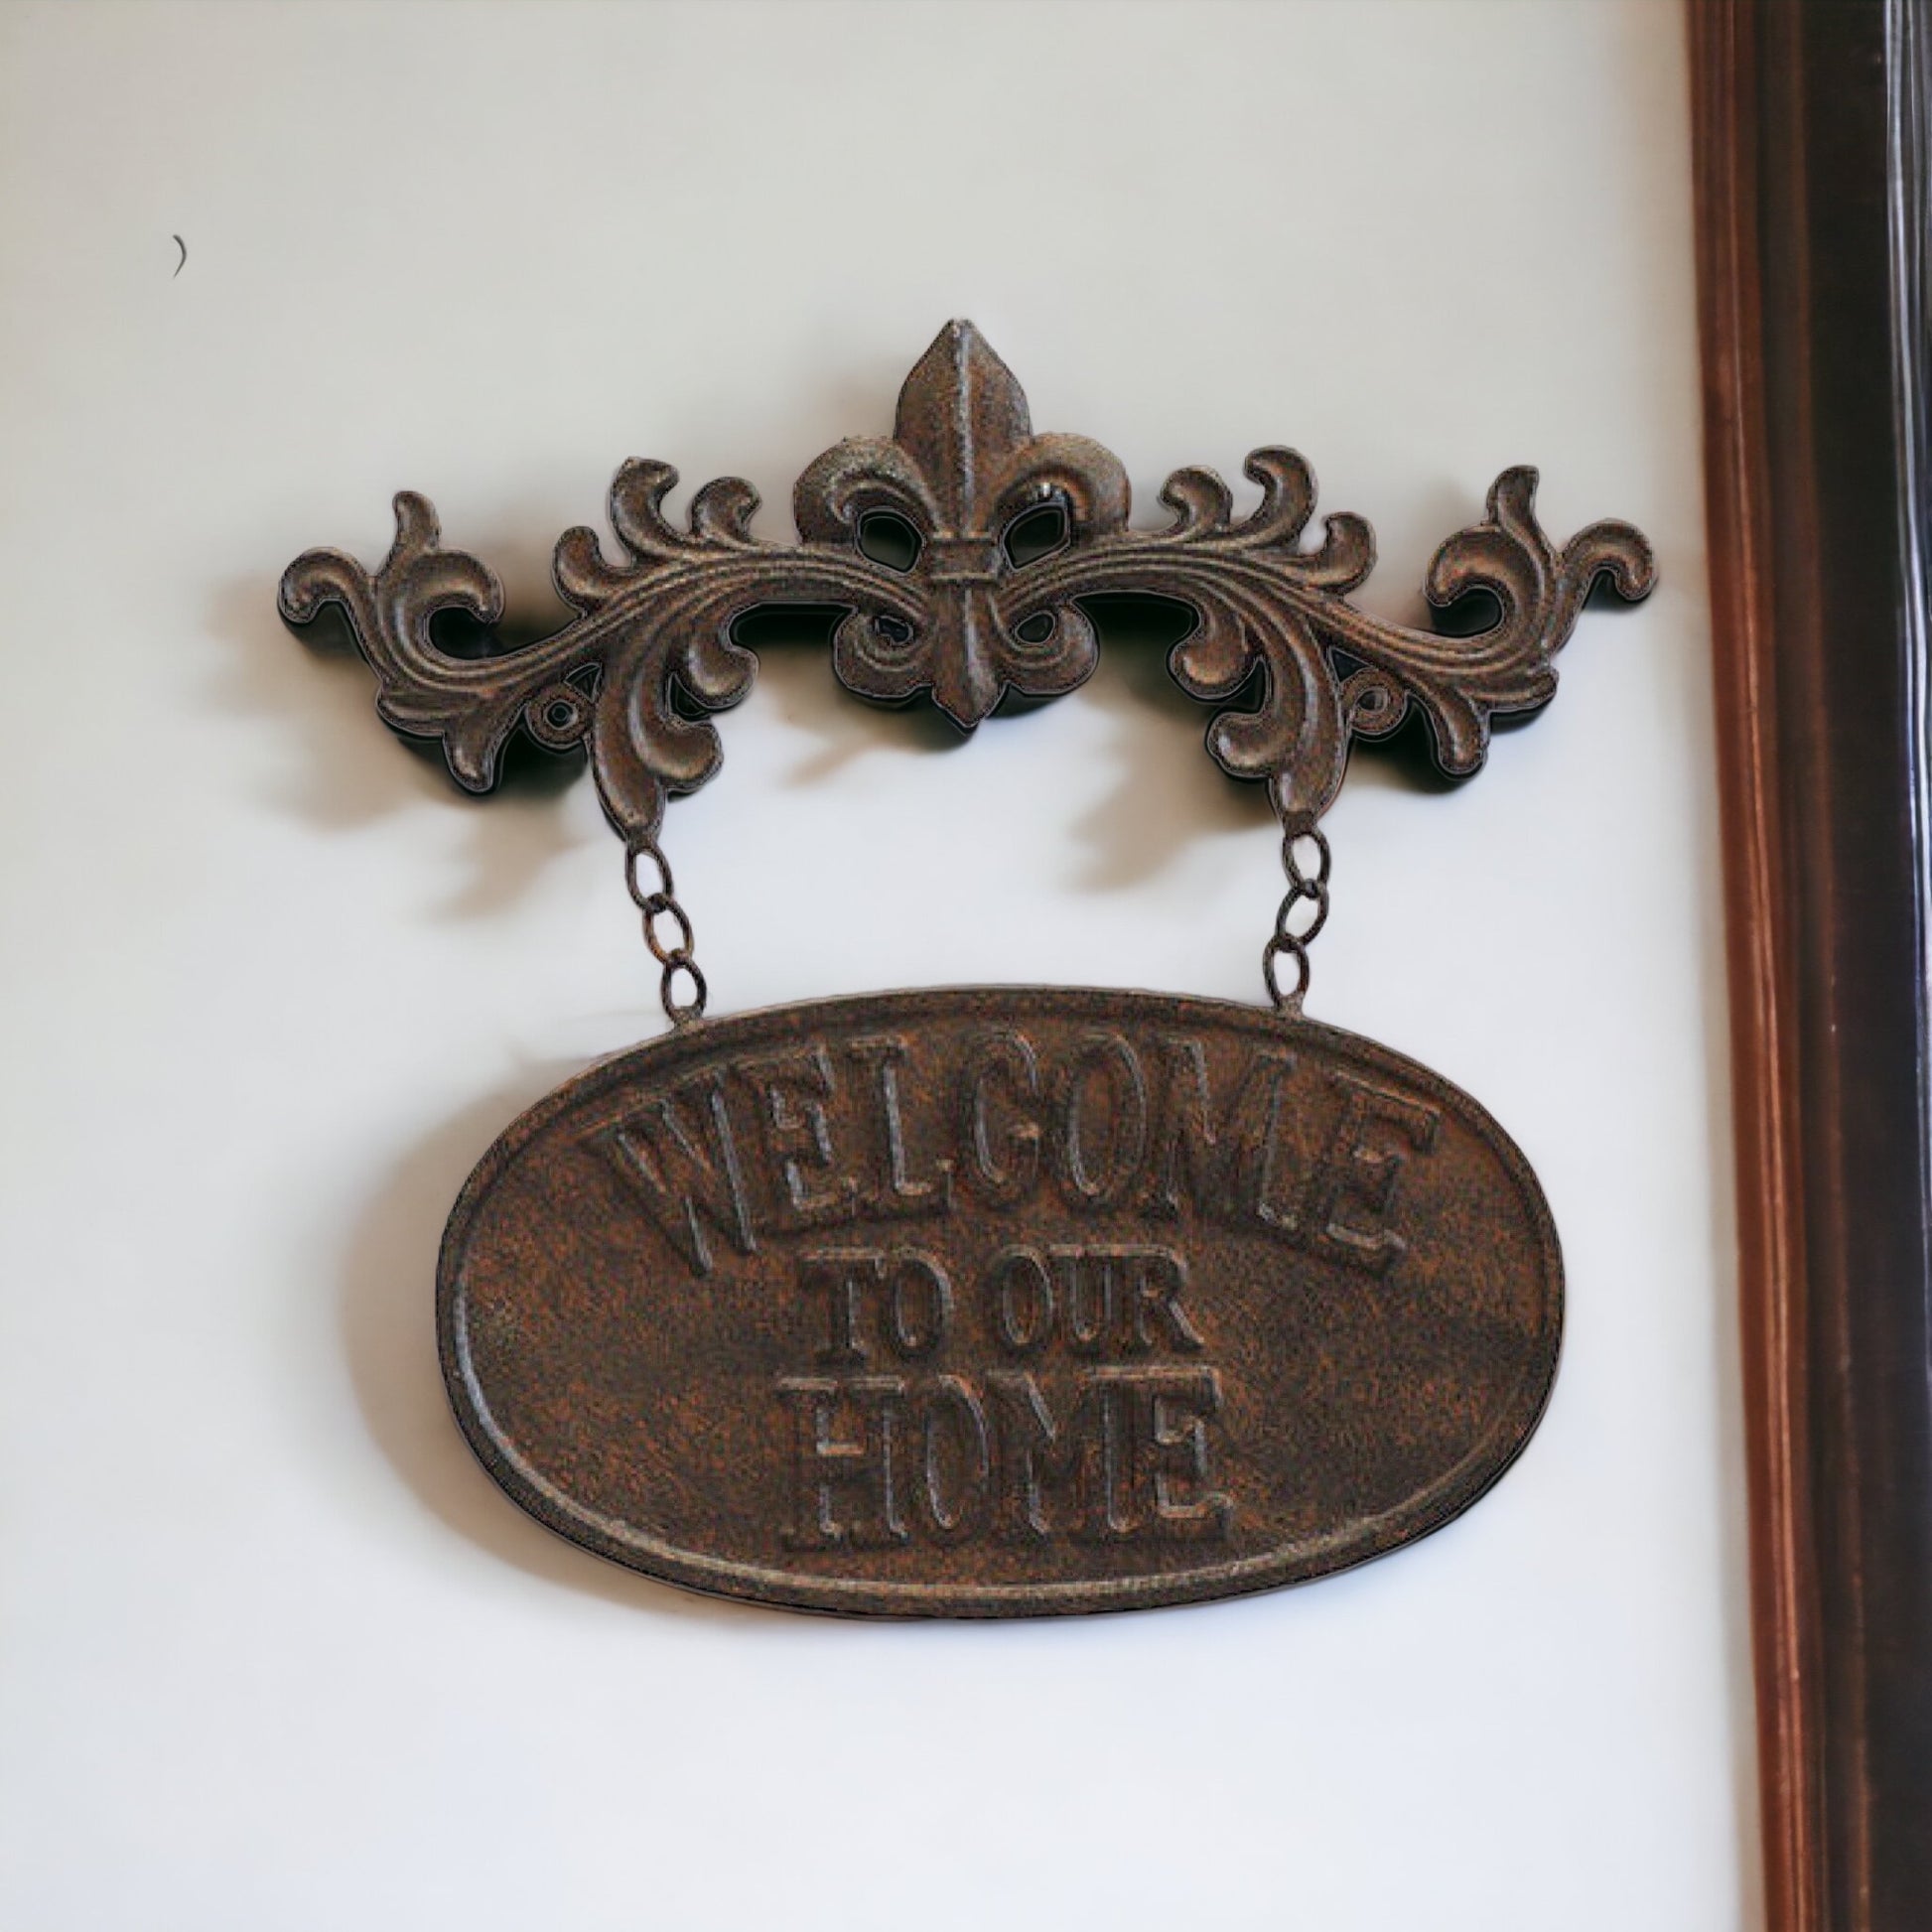 Welcome To Our Home Iron Decorative Fleur Sign - The Renmy Store Homewares & Gifts 